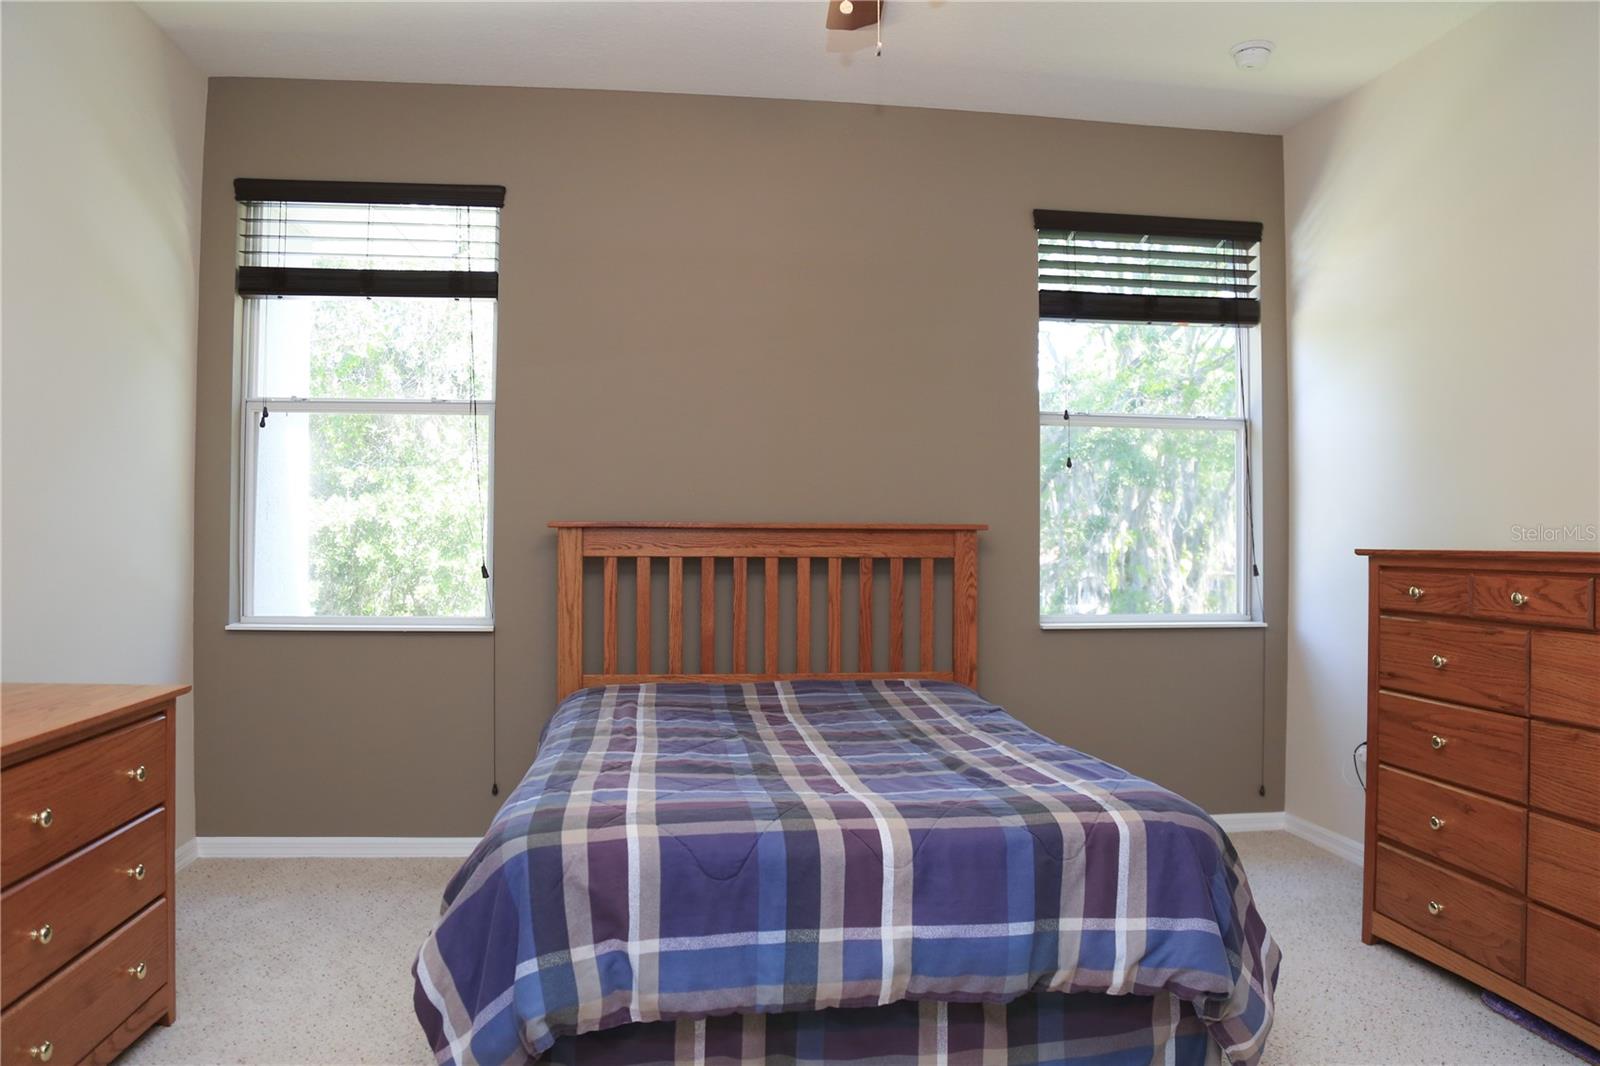 Master bedroom features two windows allowing lots of natural light throughout